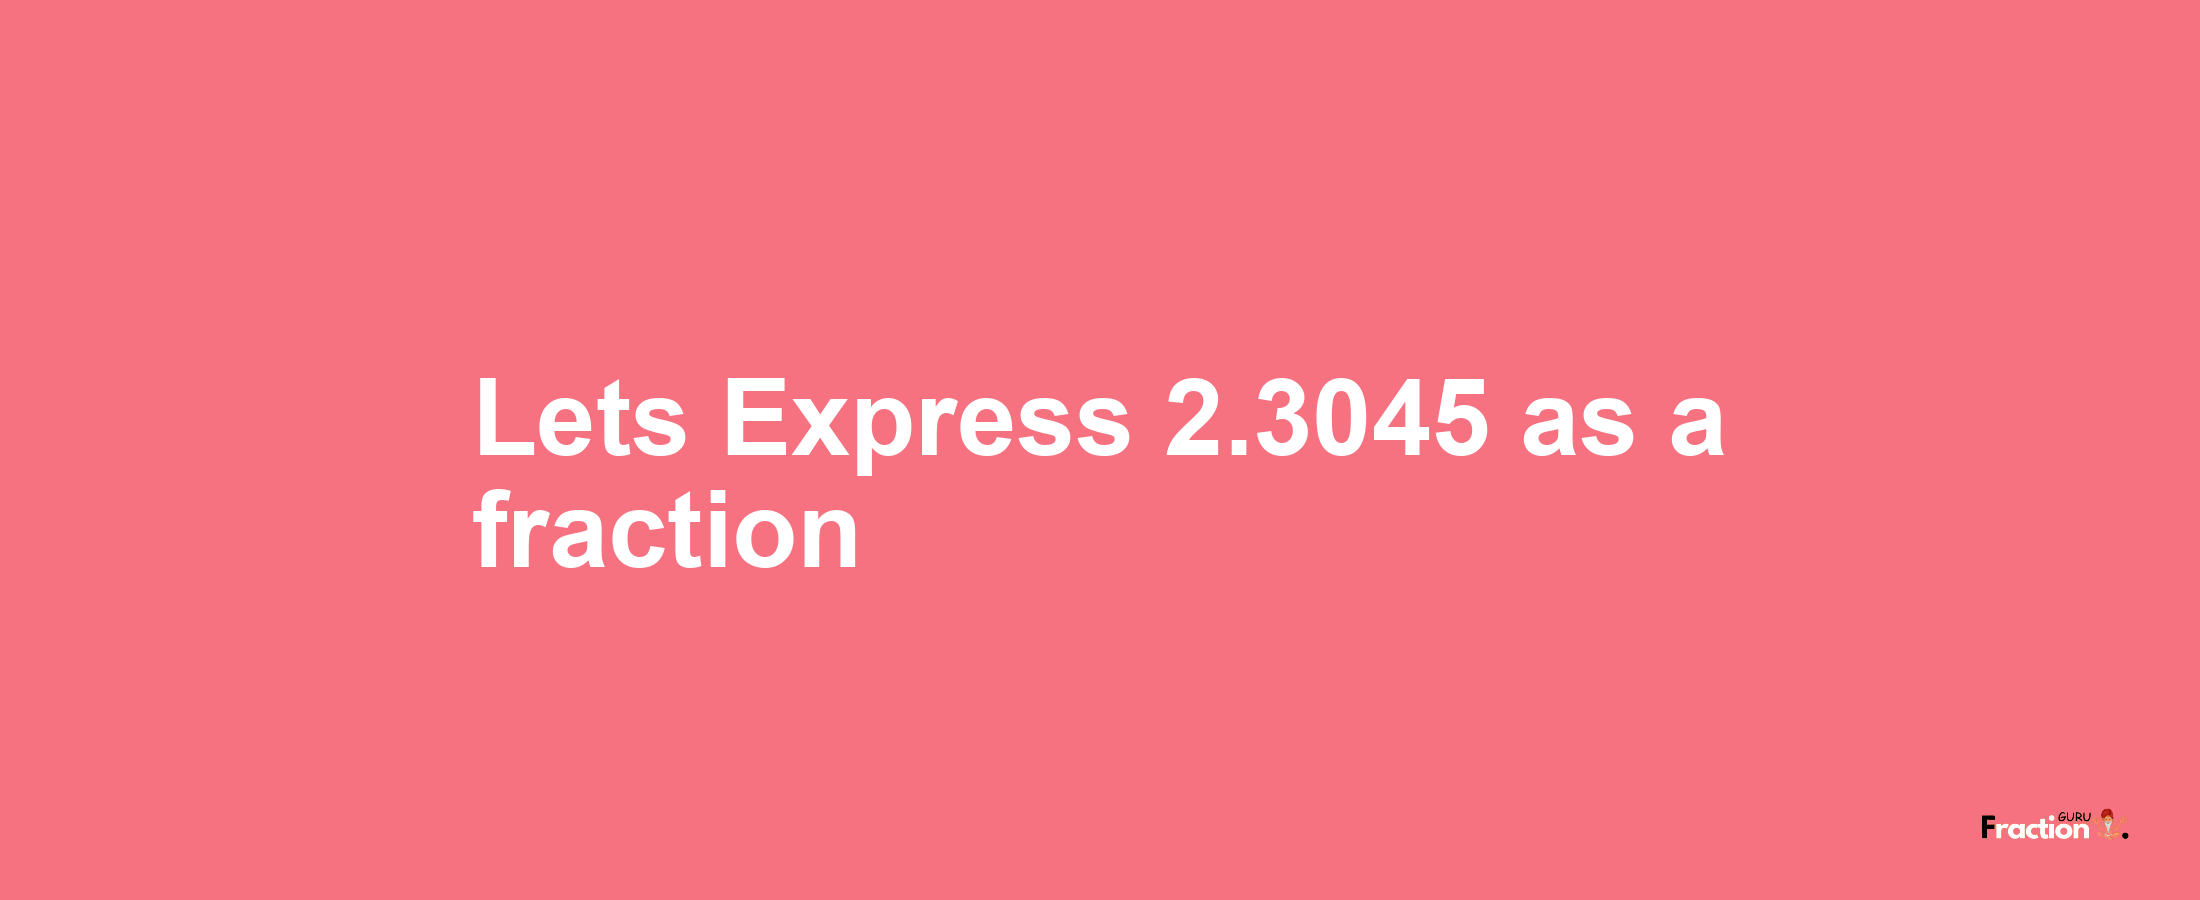 Lets Express 2.3045 as afraction